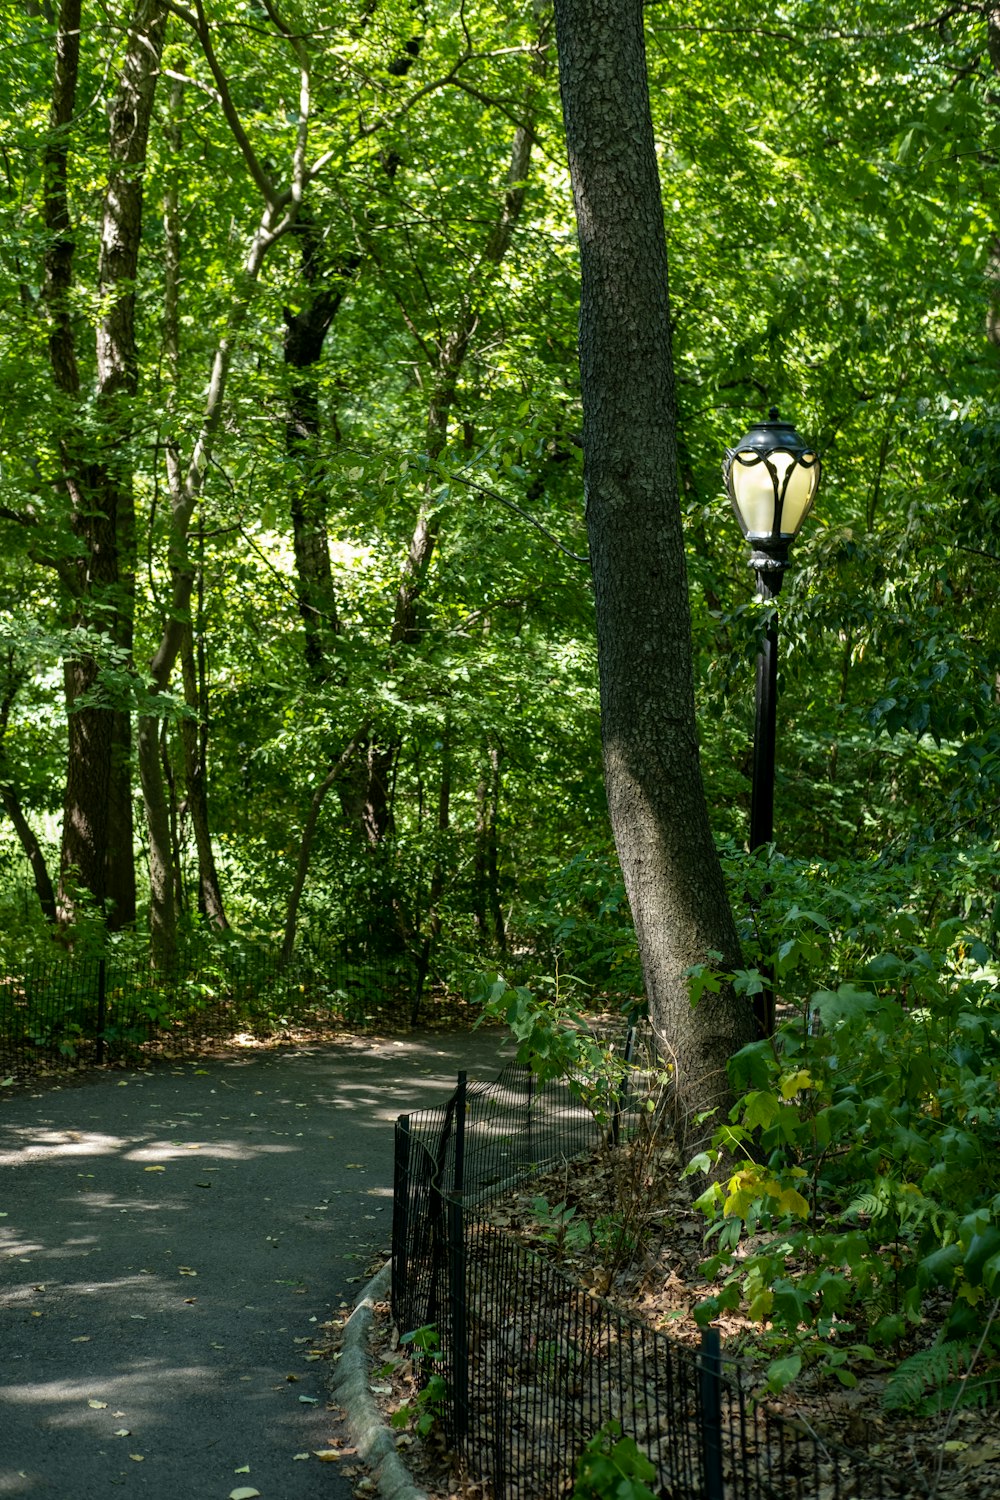 a lamp post on a path in a forest